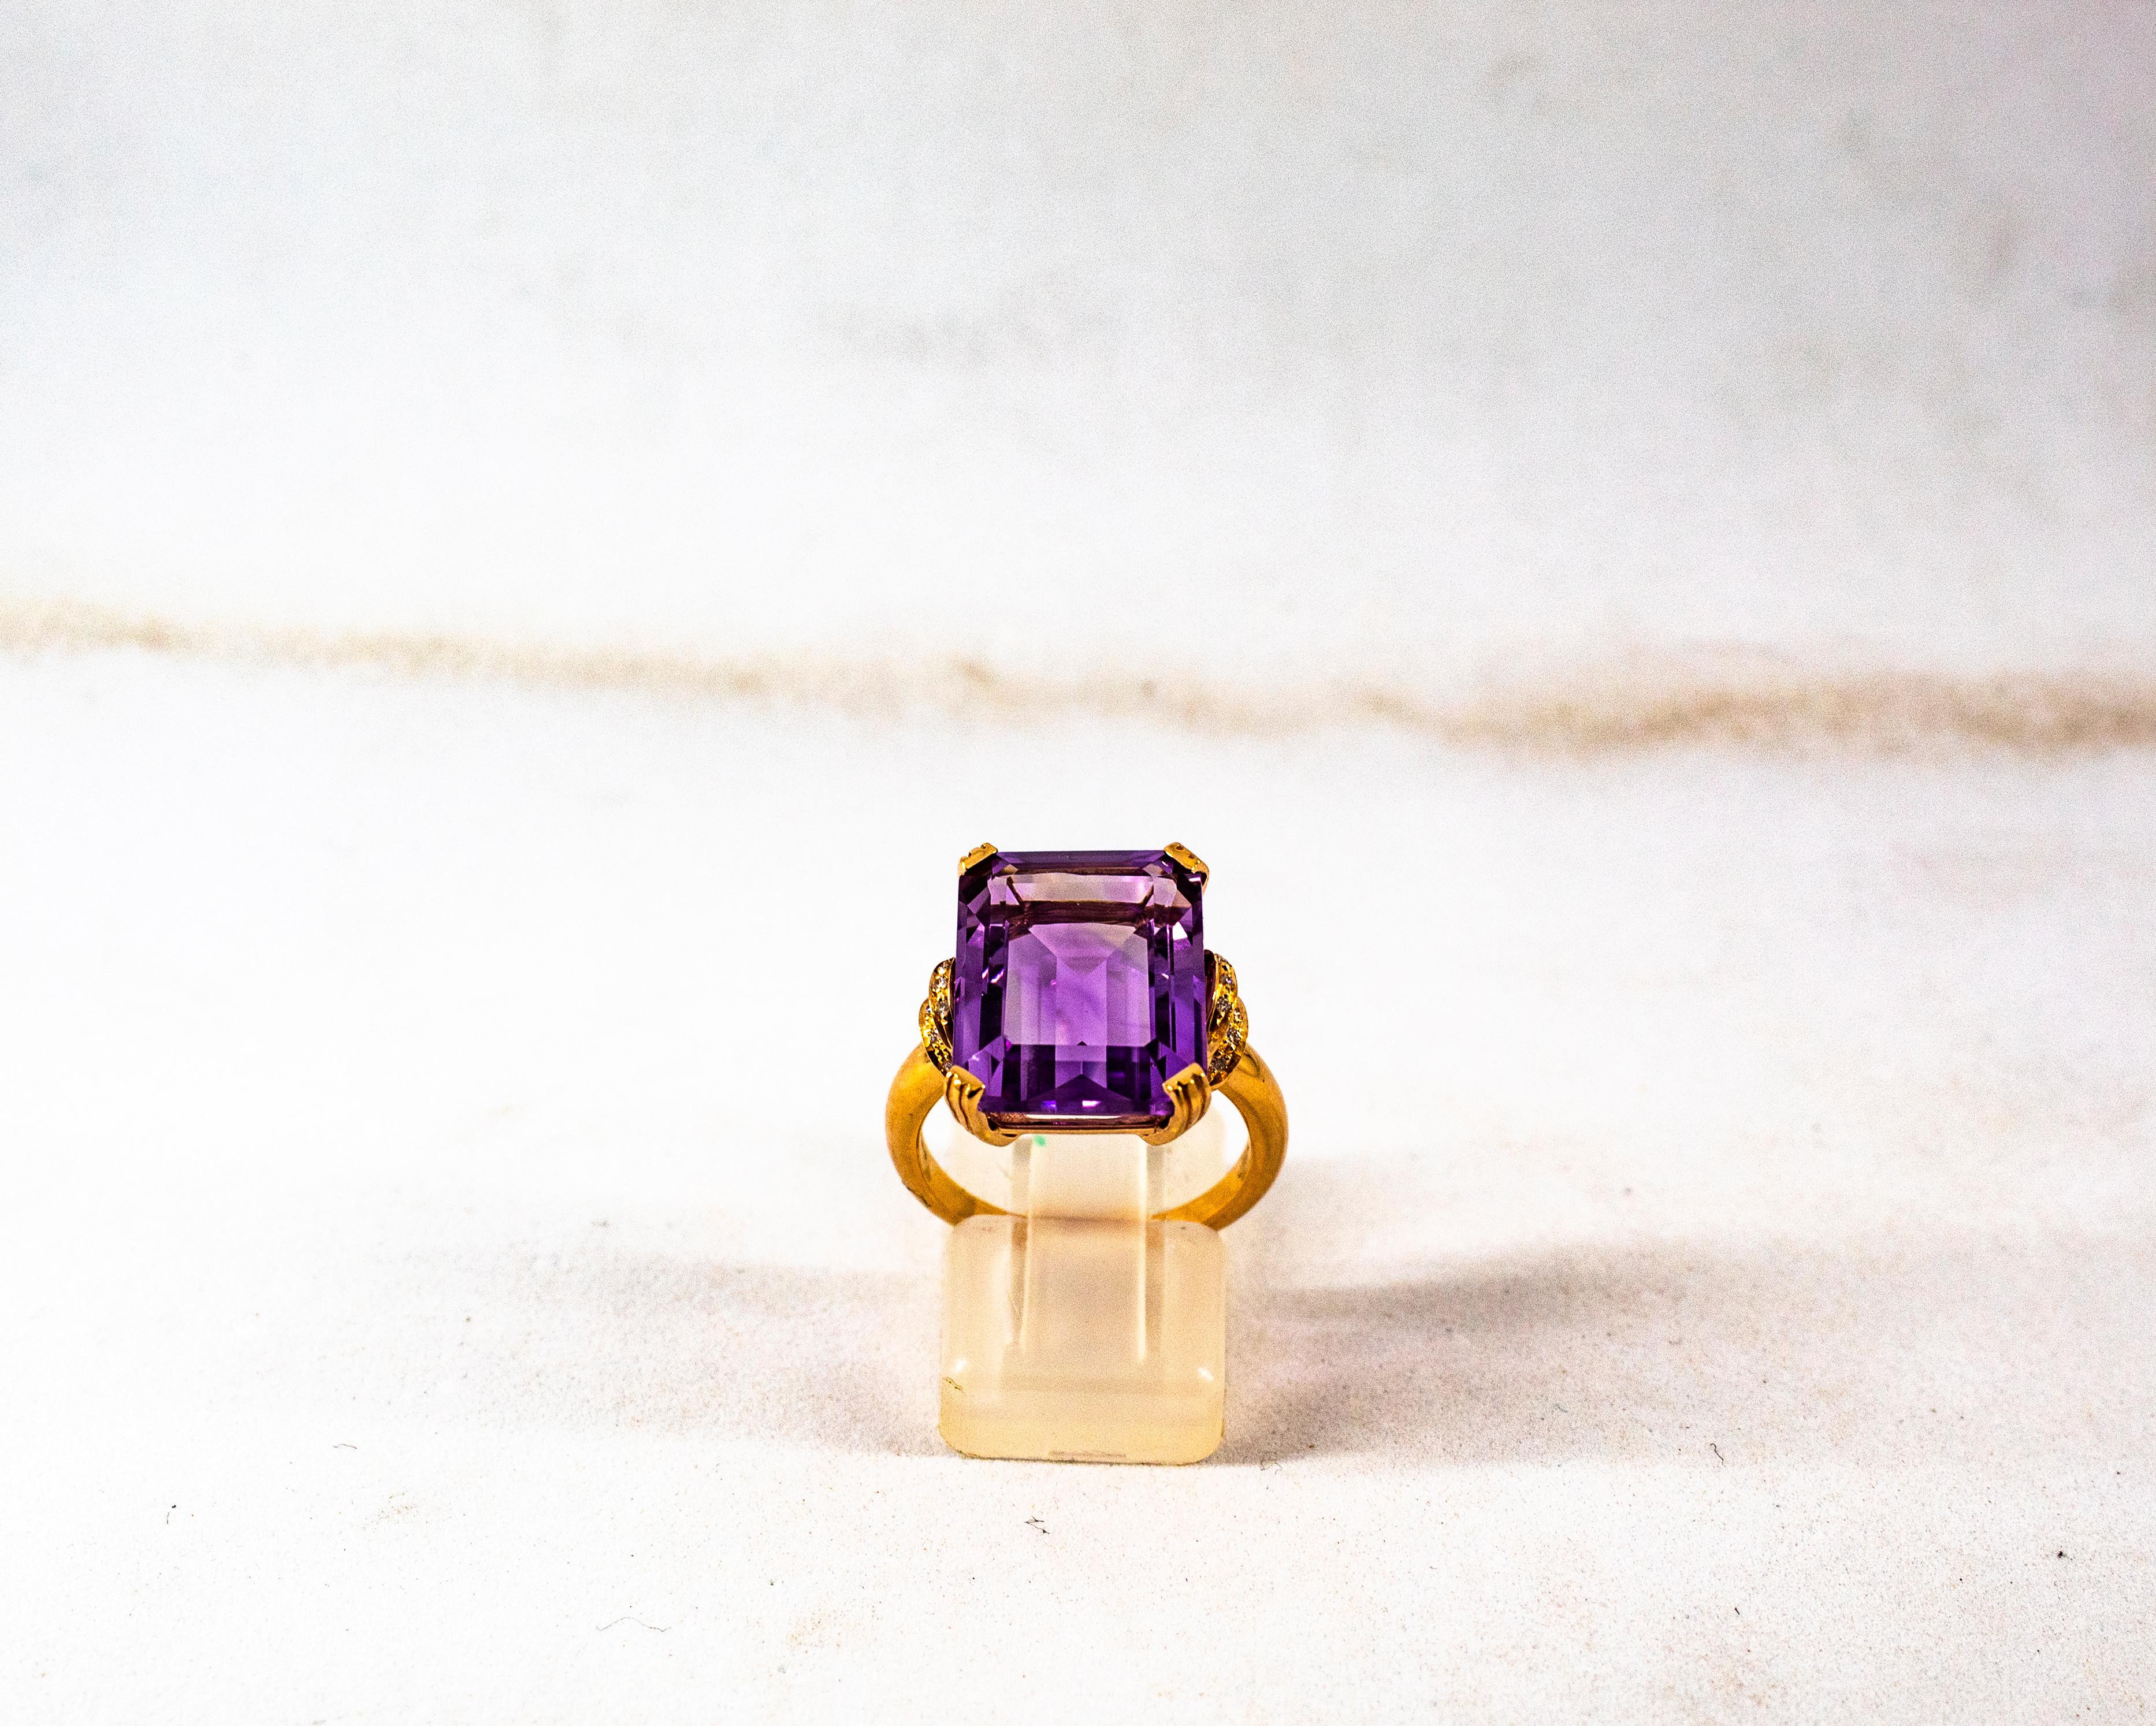 This Ring is made of 14K Yellow Gold.
This Ring has 0.06 Carats of White Brilliant Cut Diamonds.
This Ring has a 10.00 Carats Amethyst.
This Ring is inspired by Art Deco.

This Ring is available also in 9 or 18K Yellow or White Gold.
This Ring is